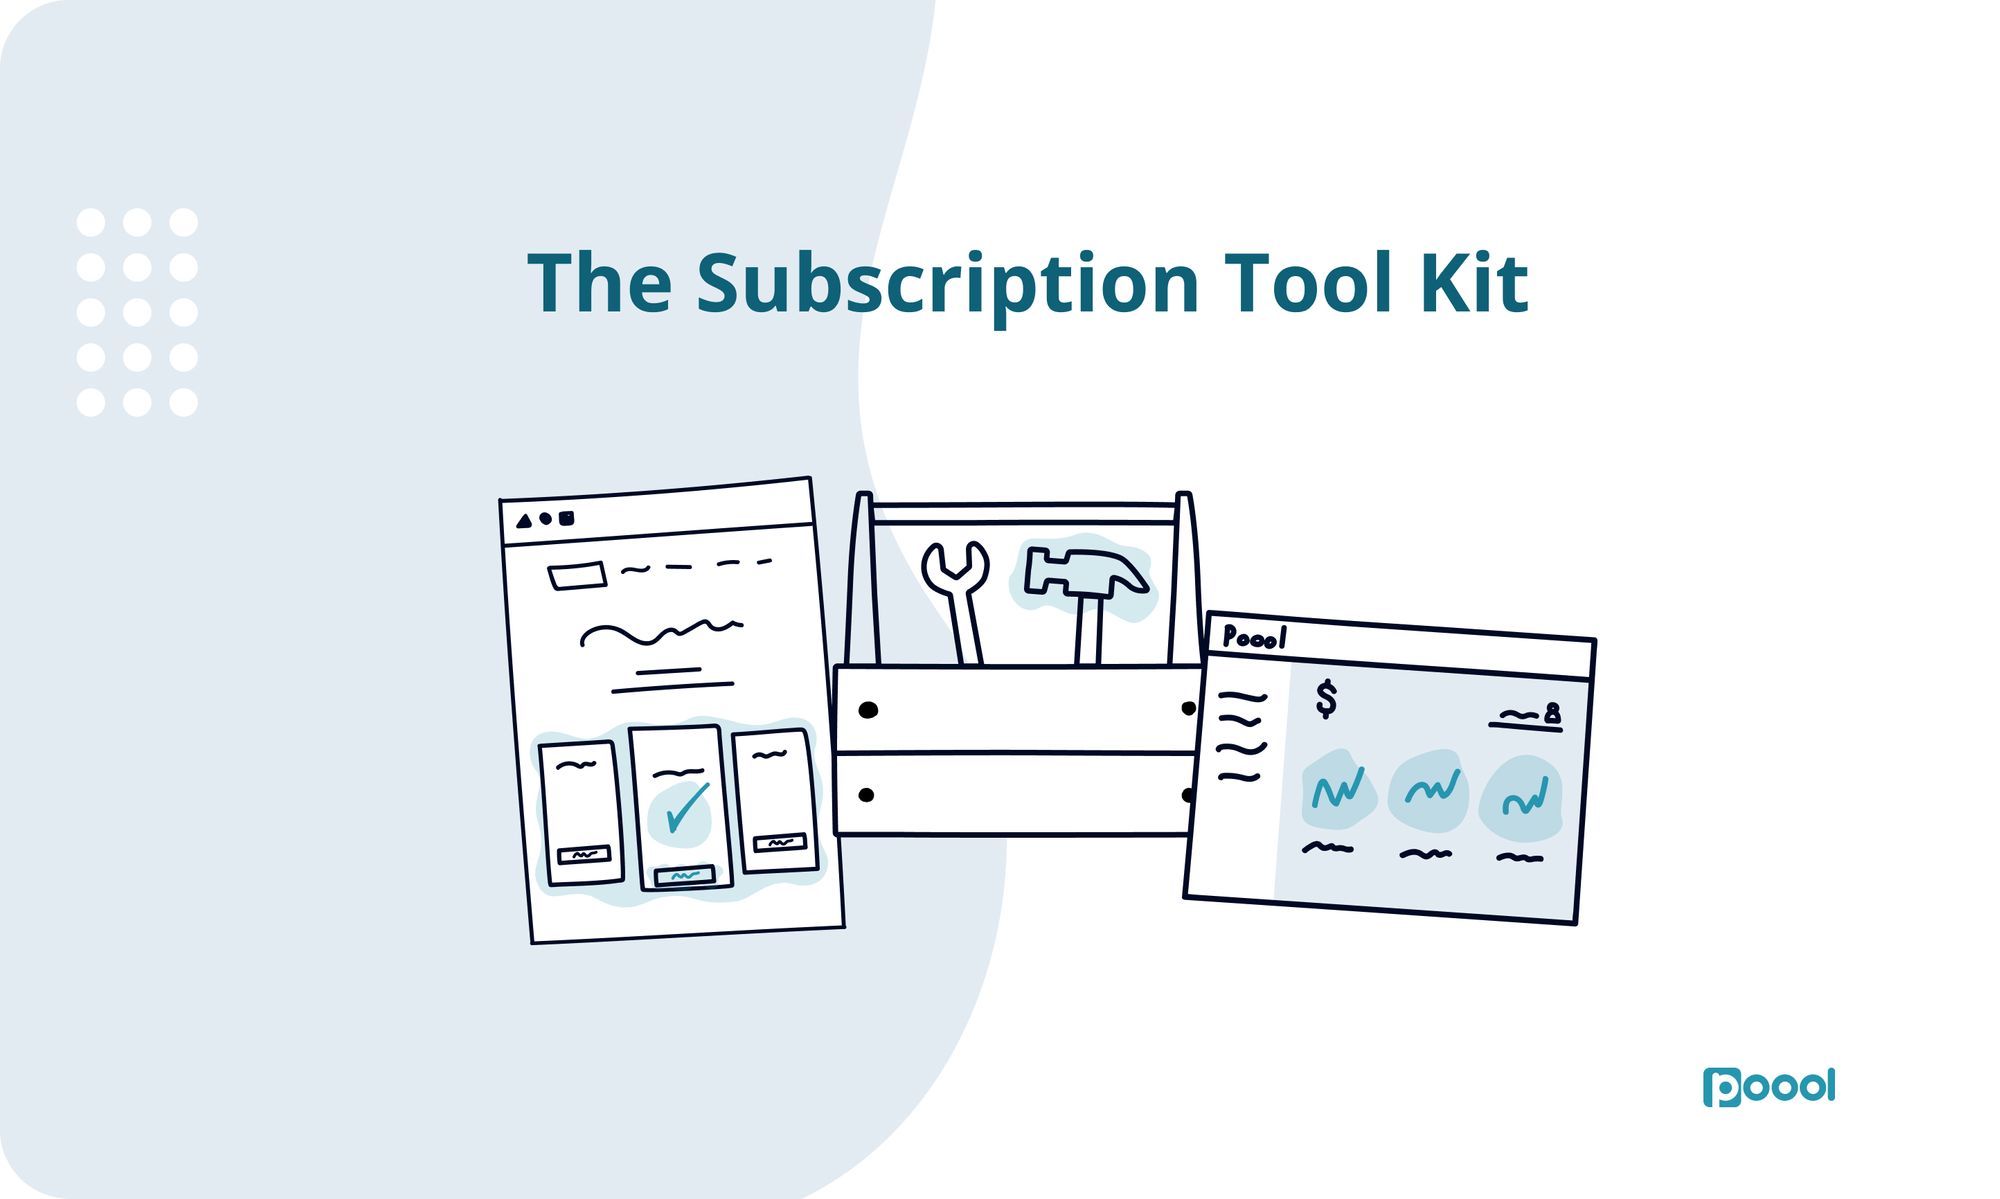 The Subscription Tool Kit.